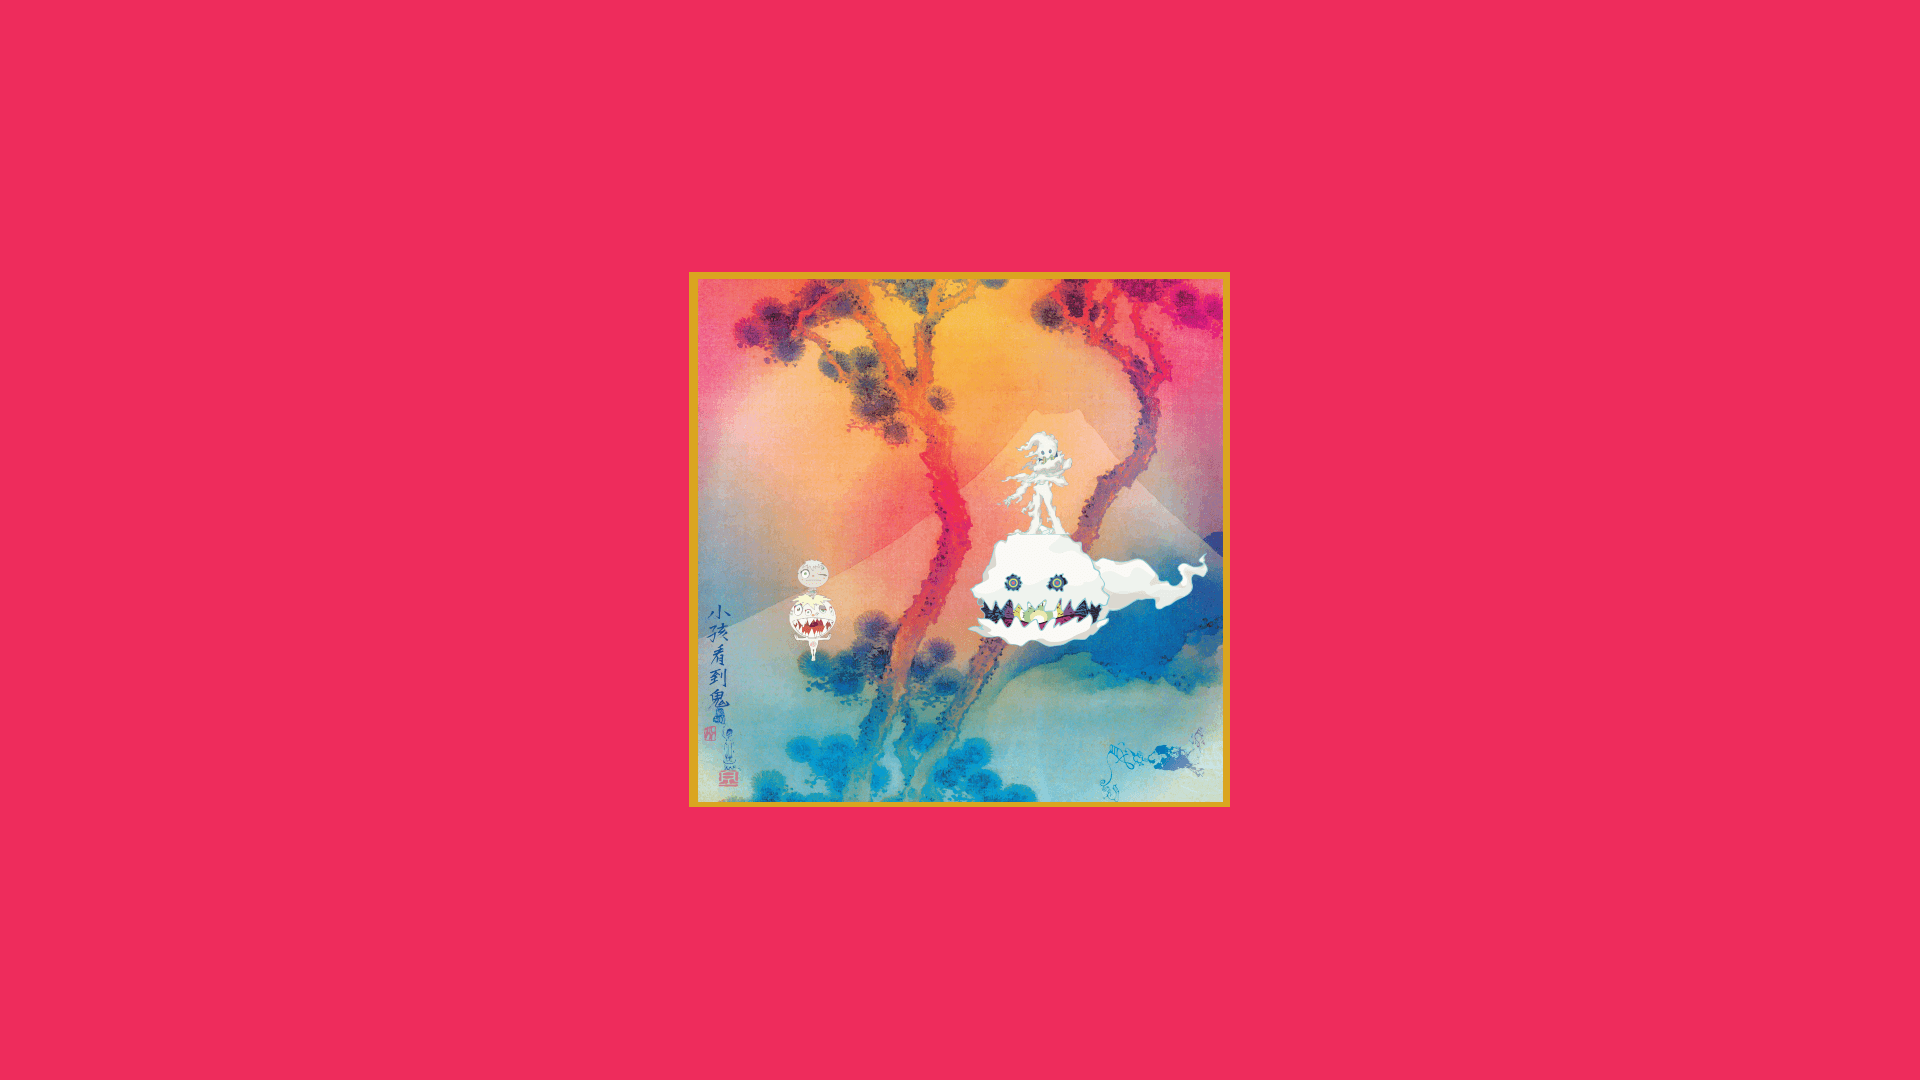 I made some new Kids See Ghosts wallpaper, and I wanted to share